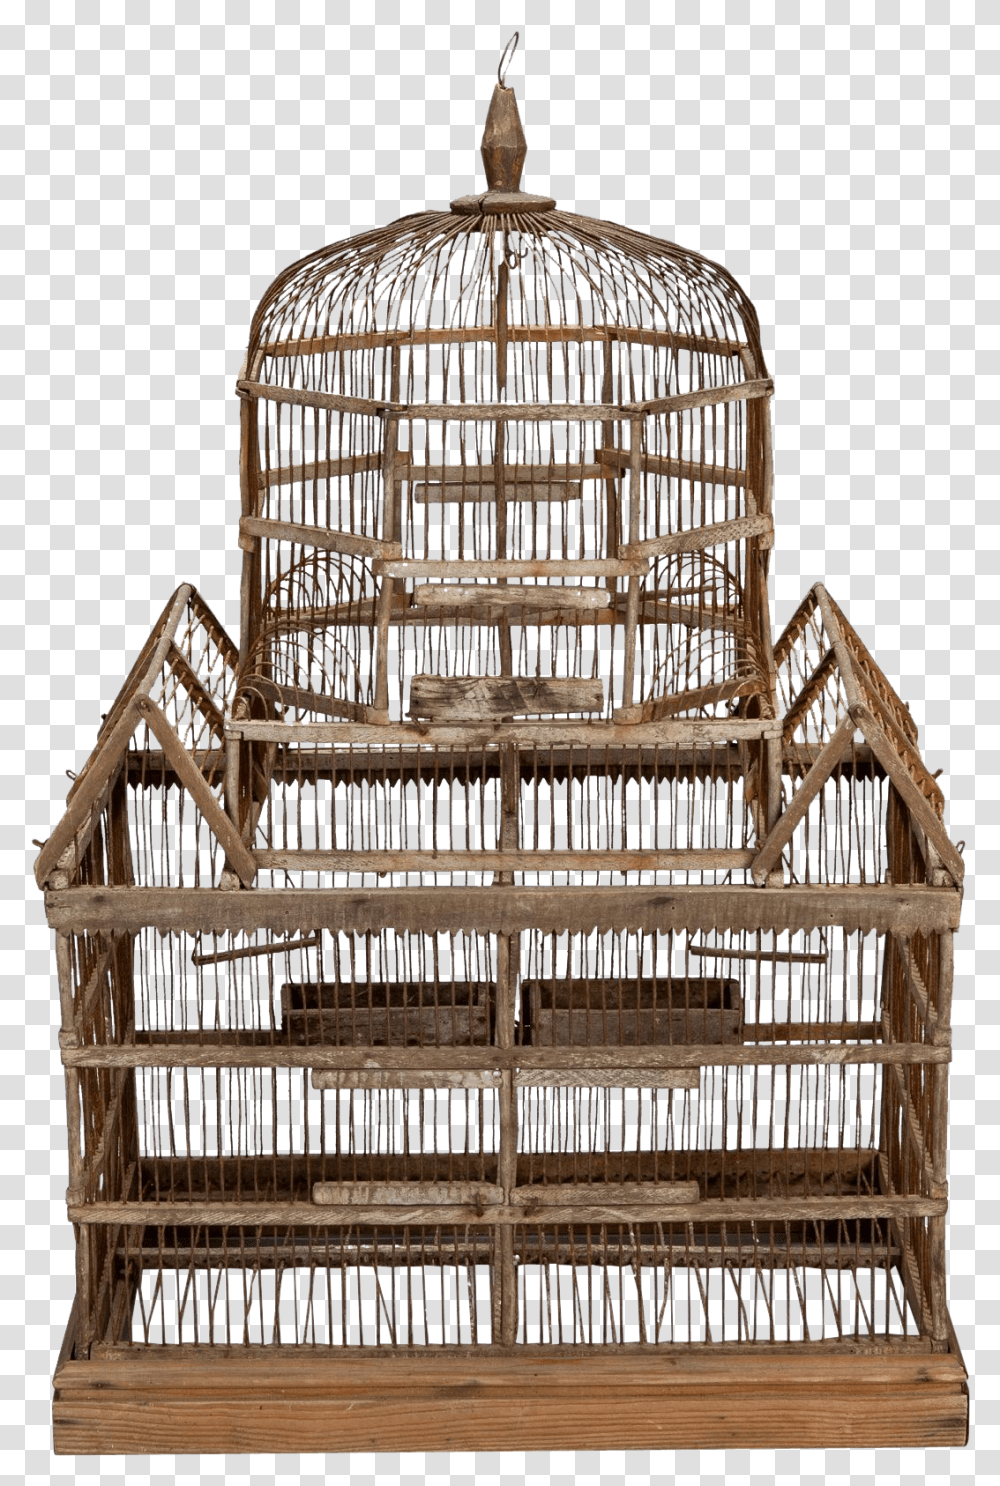 Download Hd English 19th Century Handmade Wooden Bird Cage Solid, Staircase, Furniture, Box, Chair Transparent Png